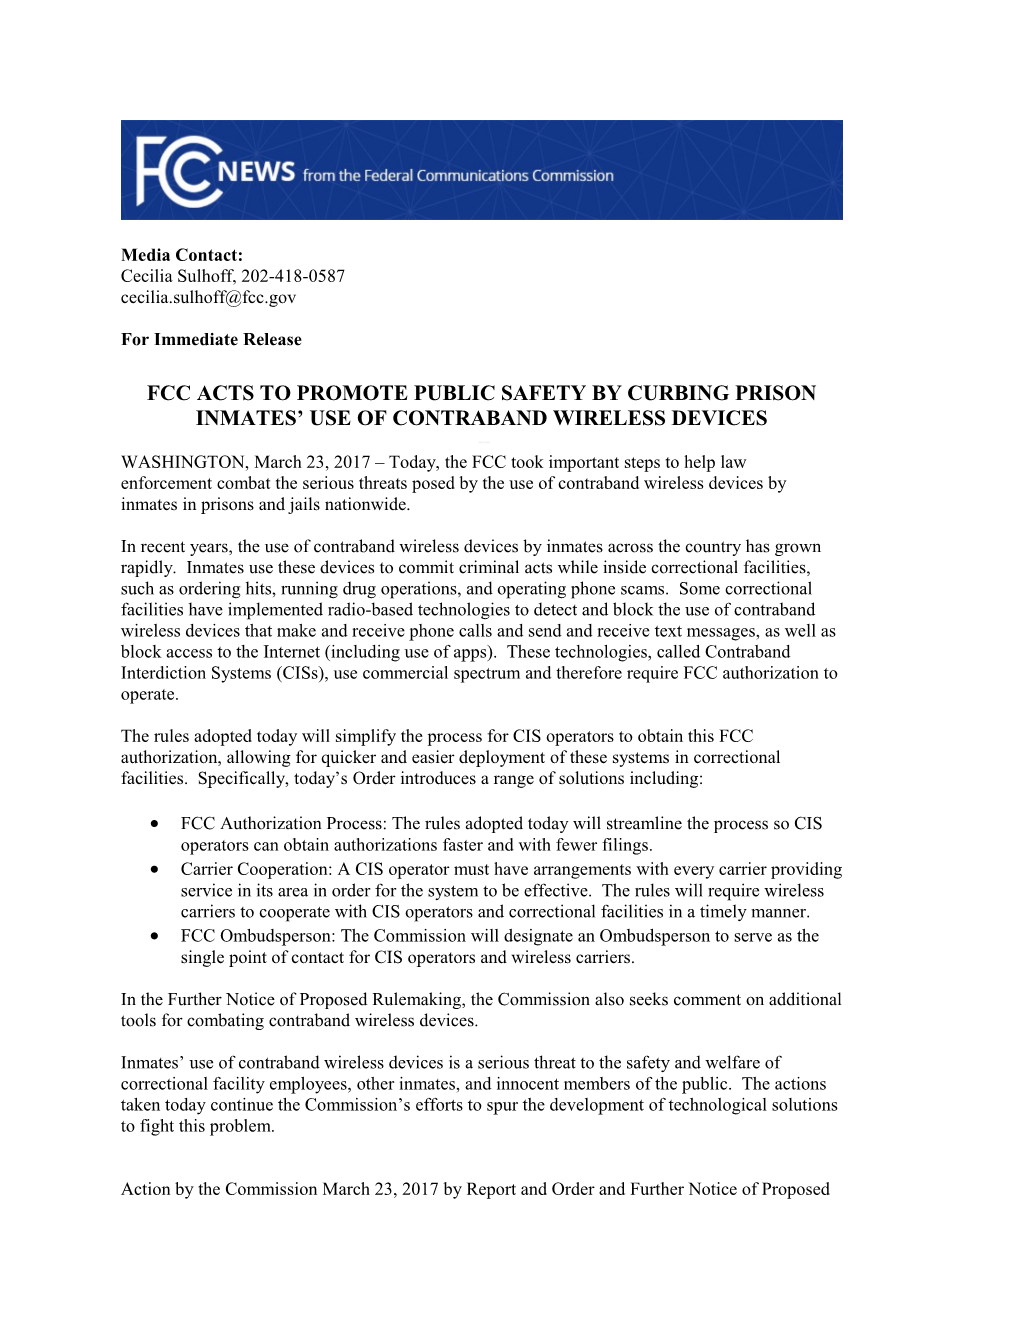 FCC Authorization Process: the Rules Adopted Today Will Streamline the Process So CIS Operators